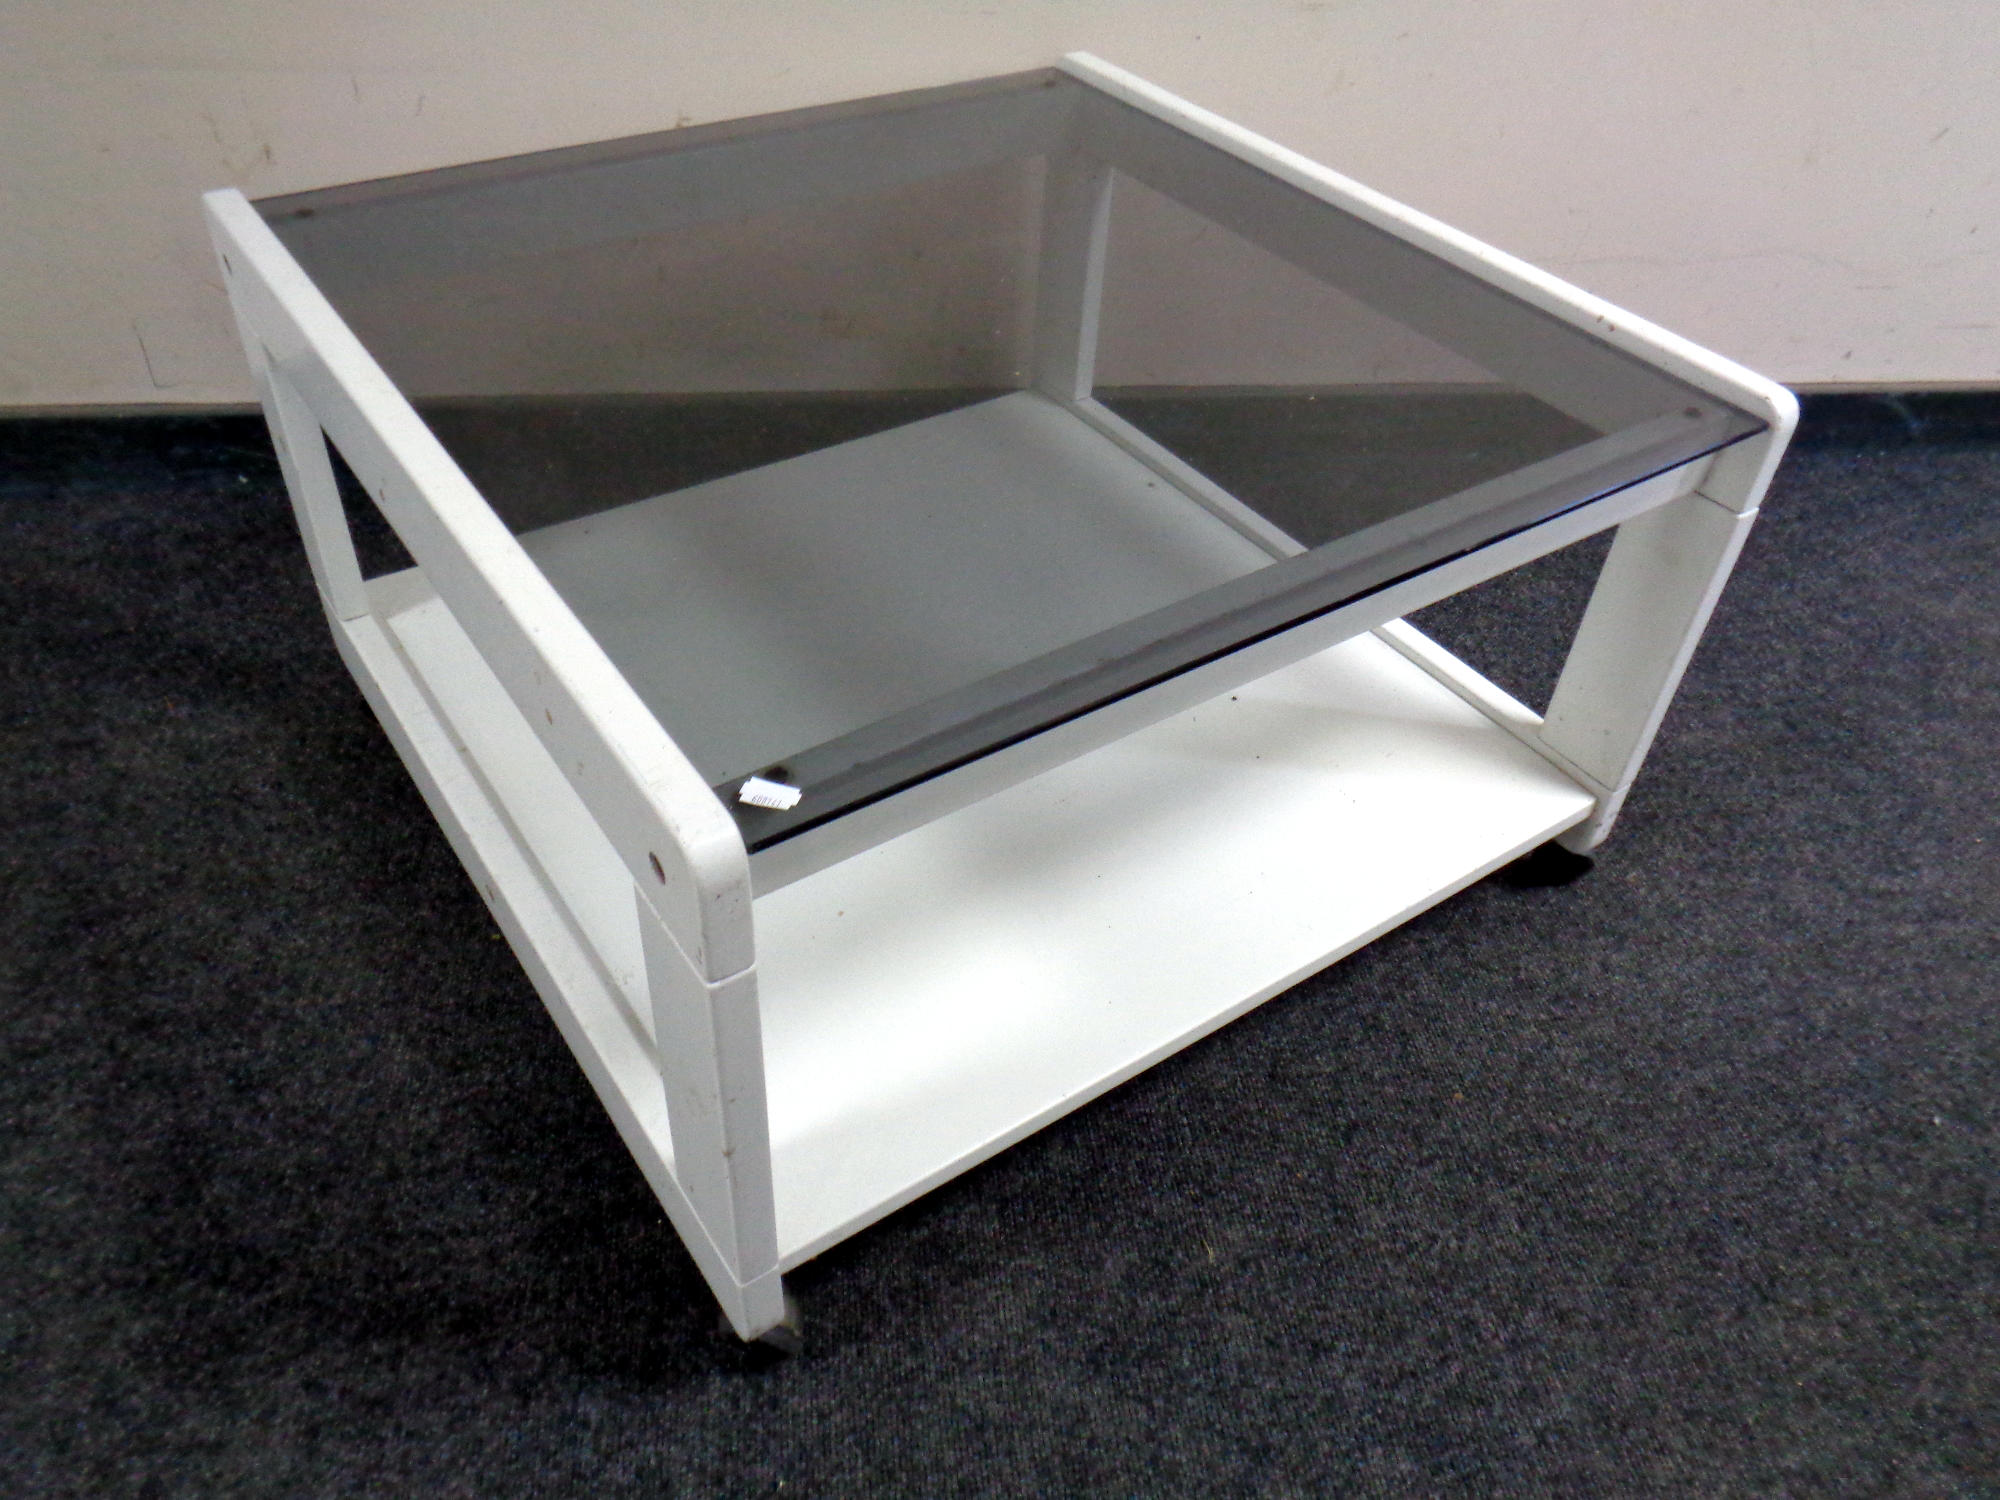 A contemporary coffee table raised on castors